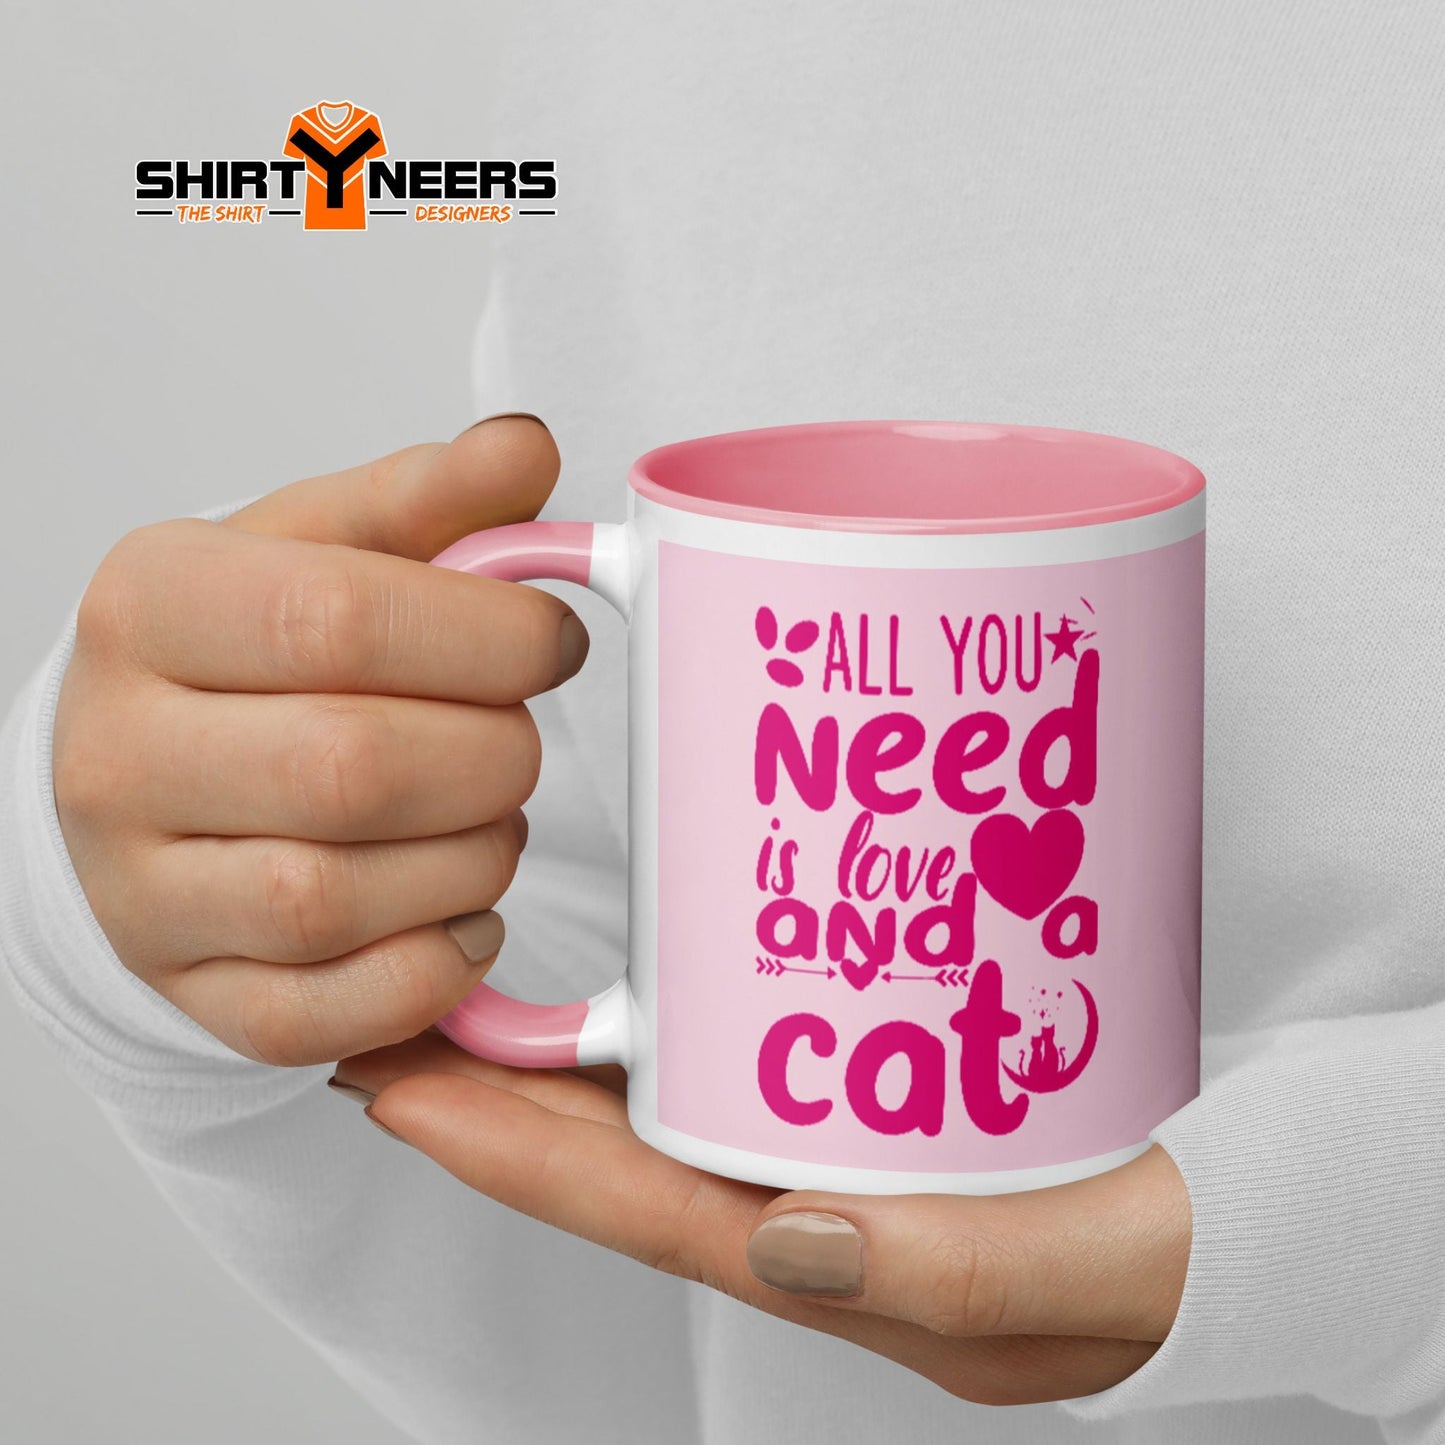 All you need is love and a cat – Tasse mit Aufdruck - Pink /